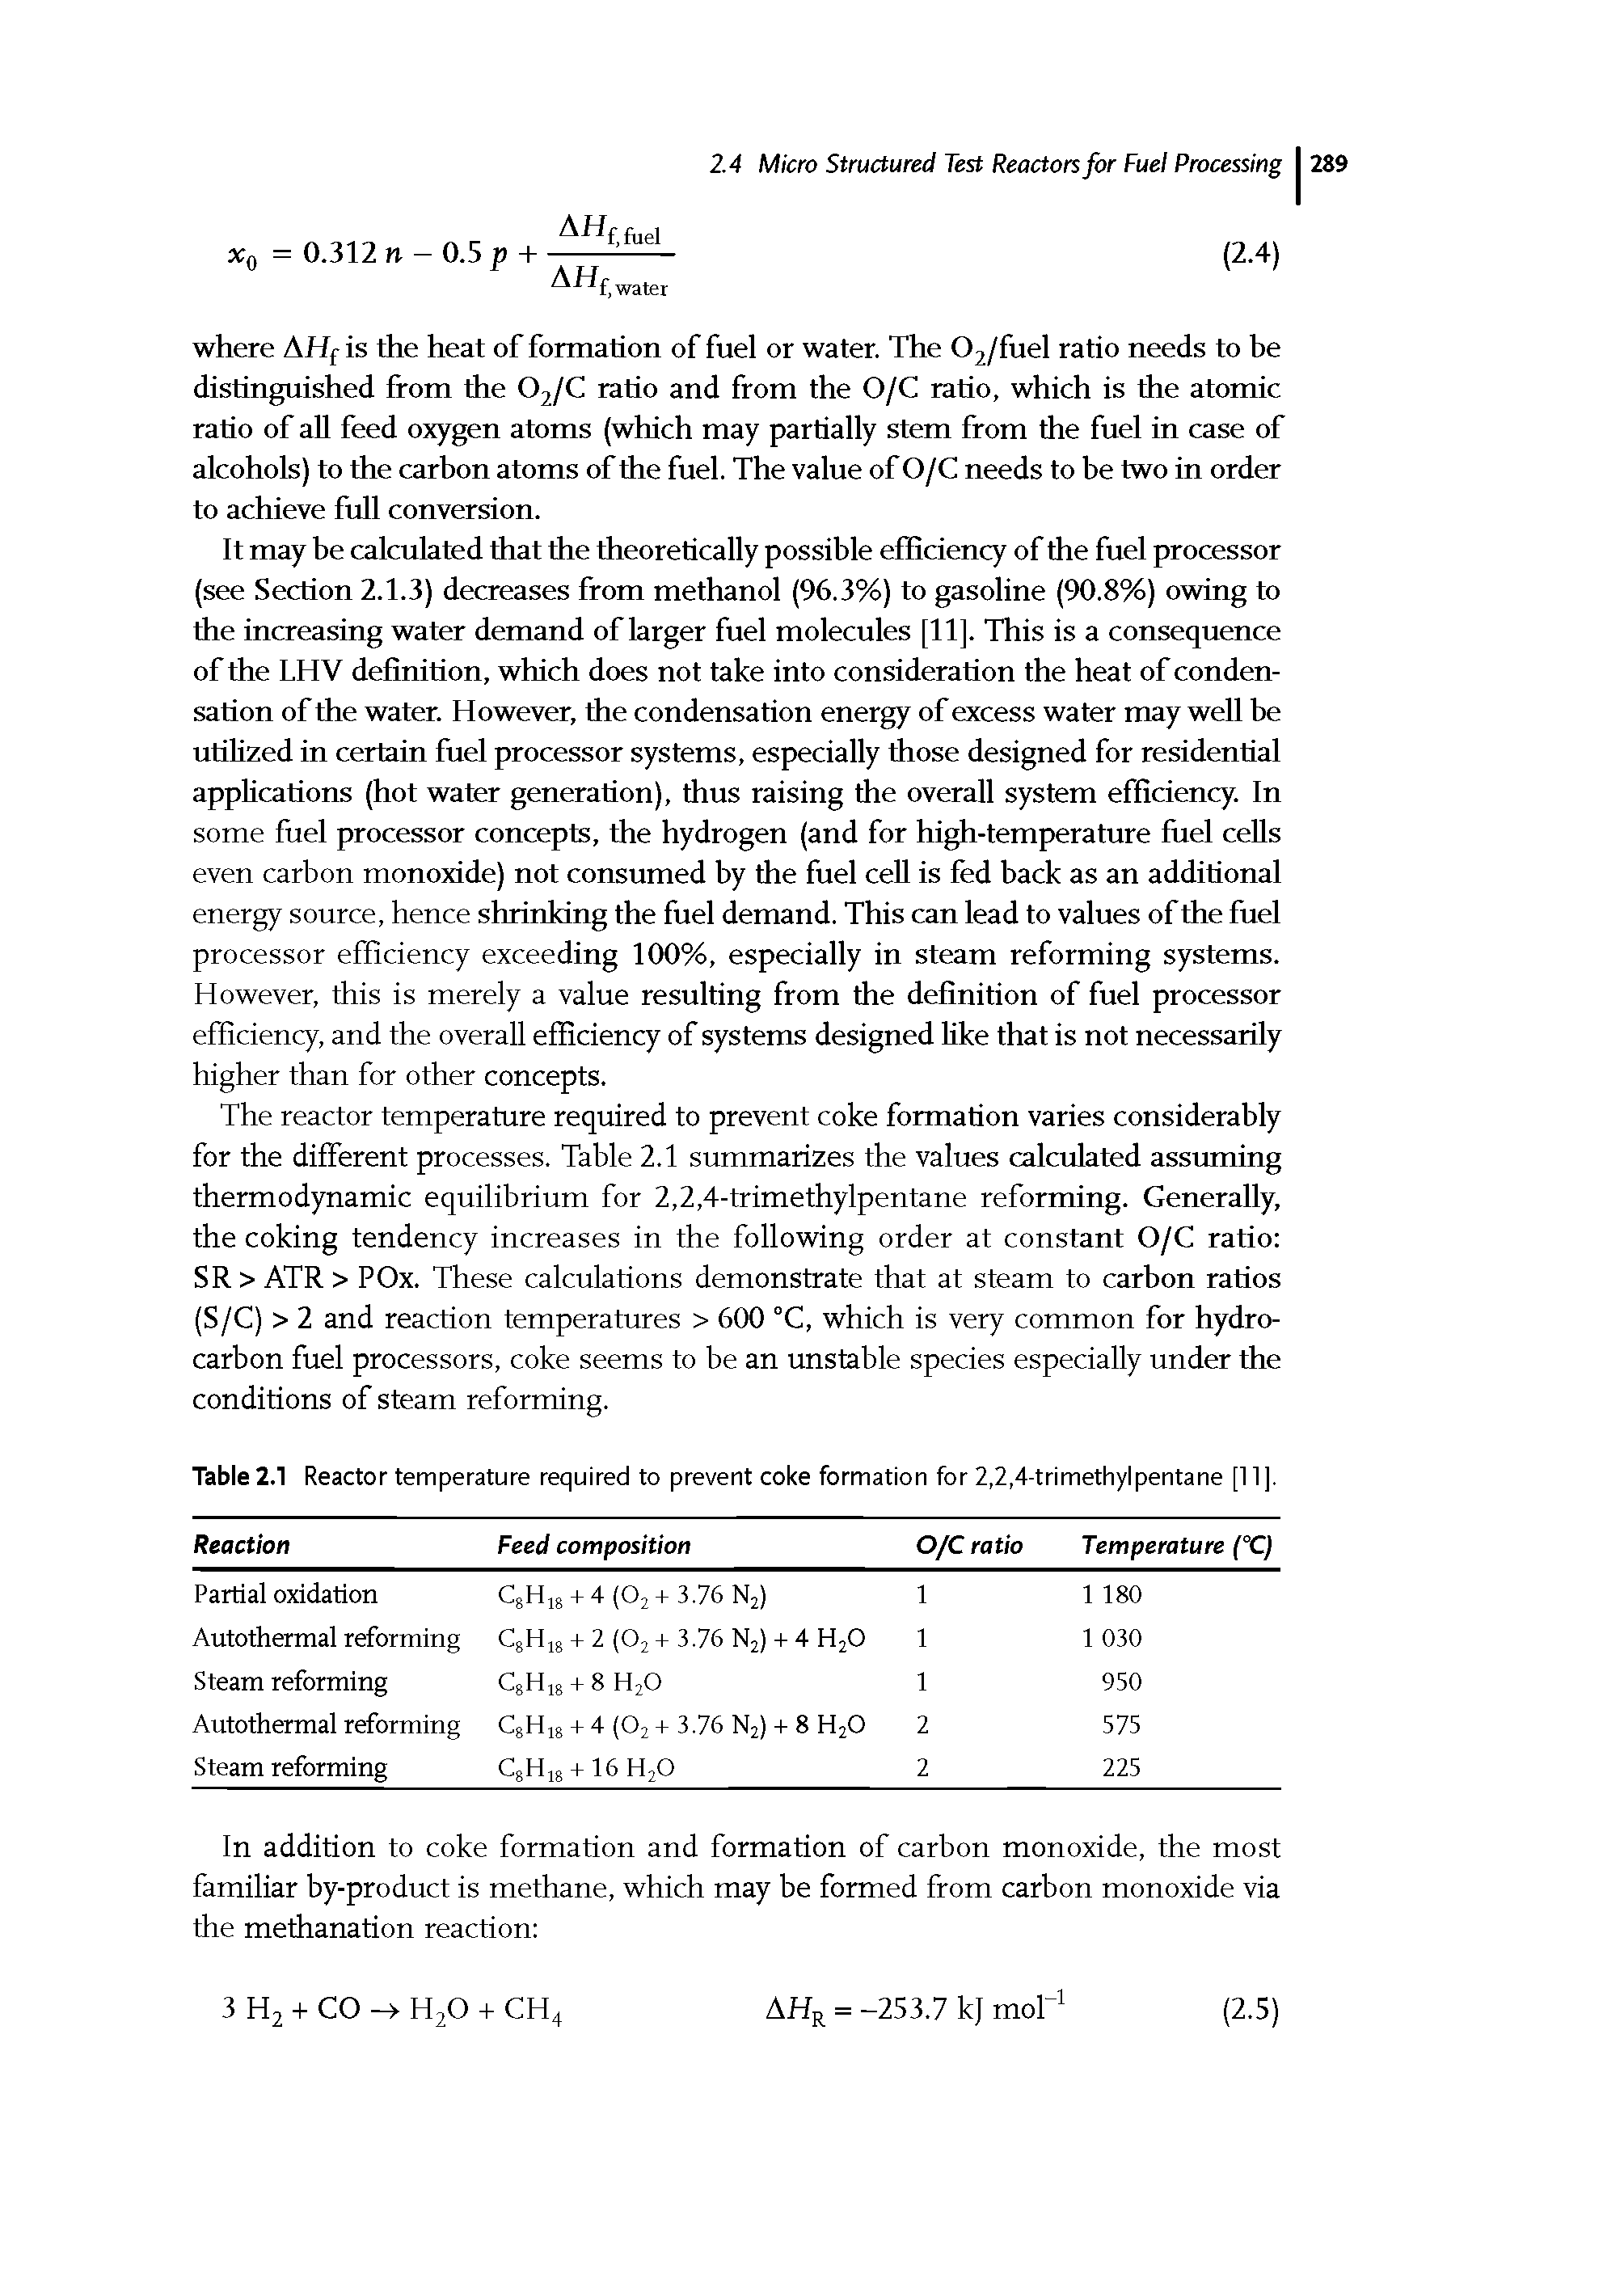 Table 2.1 Reactor temperature required to prevent coke formation for 2,2,4-trimethylpentane [11],...